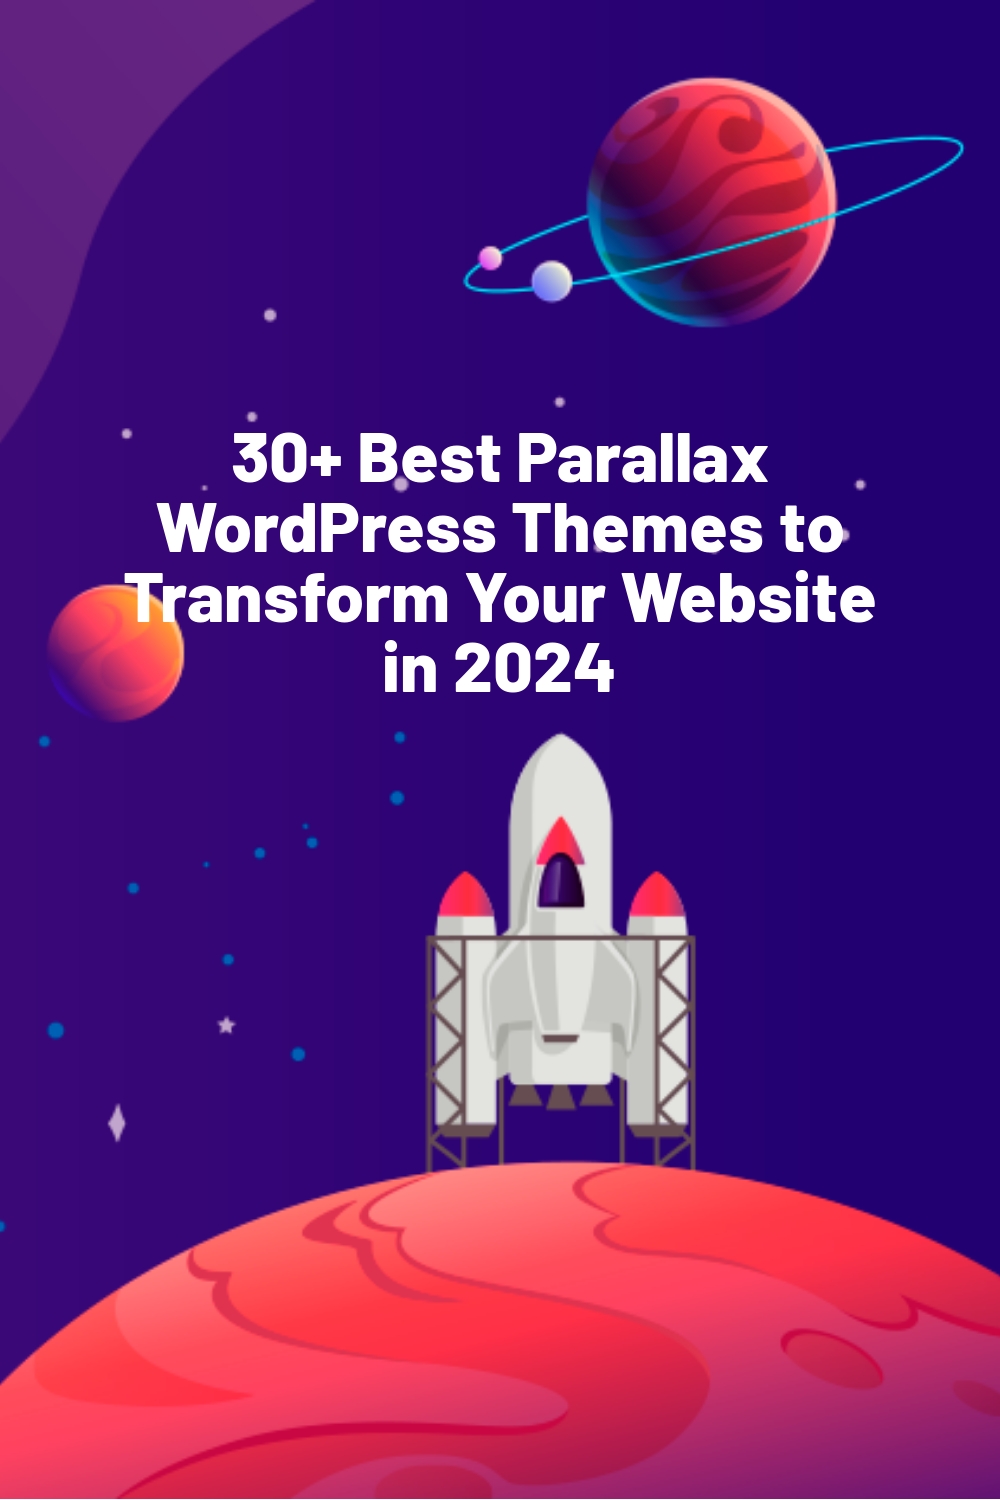 30+ Best Parallax WordPress Themes to Transform Your Website in 2024